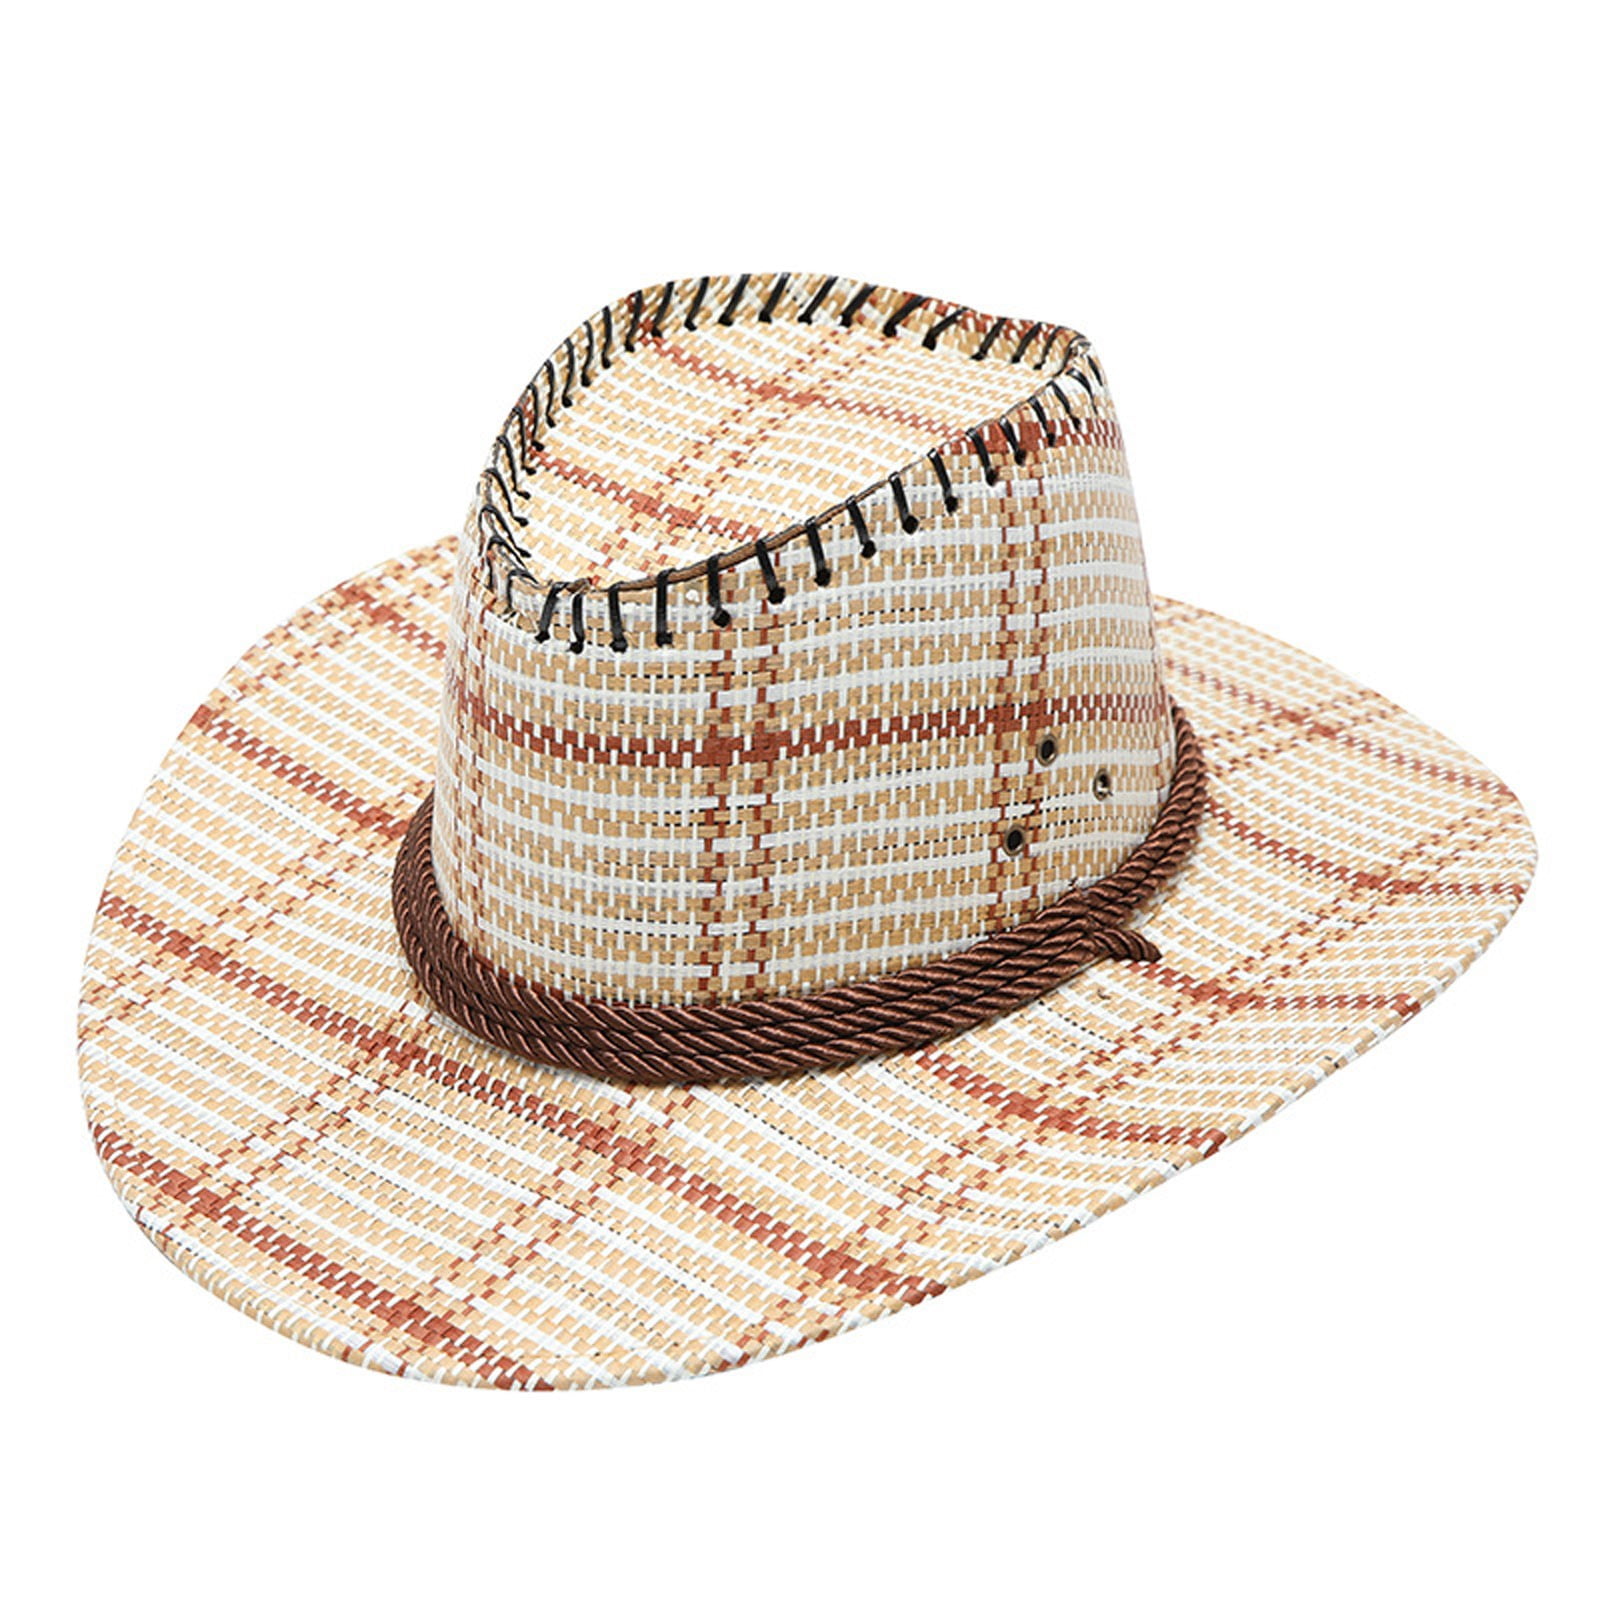 1pc Women Checkered Pattern Casual Bucket Hat For Summer